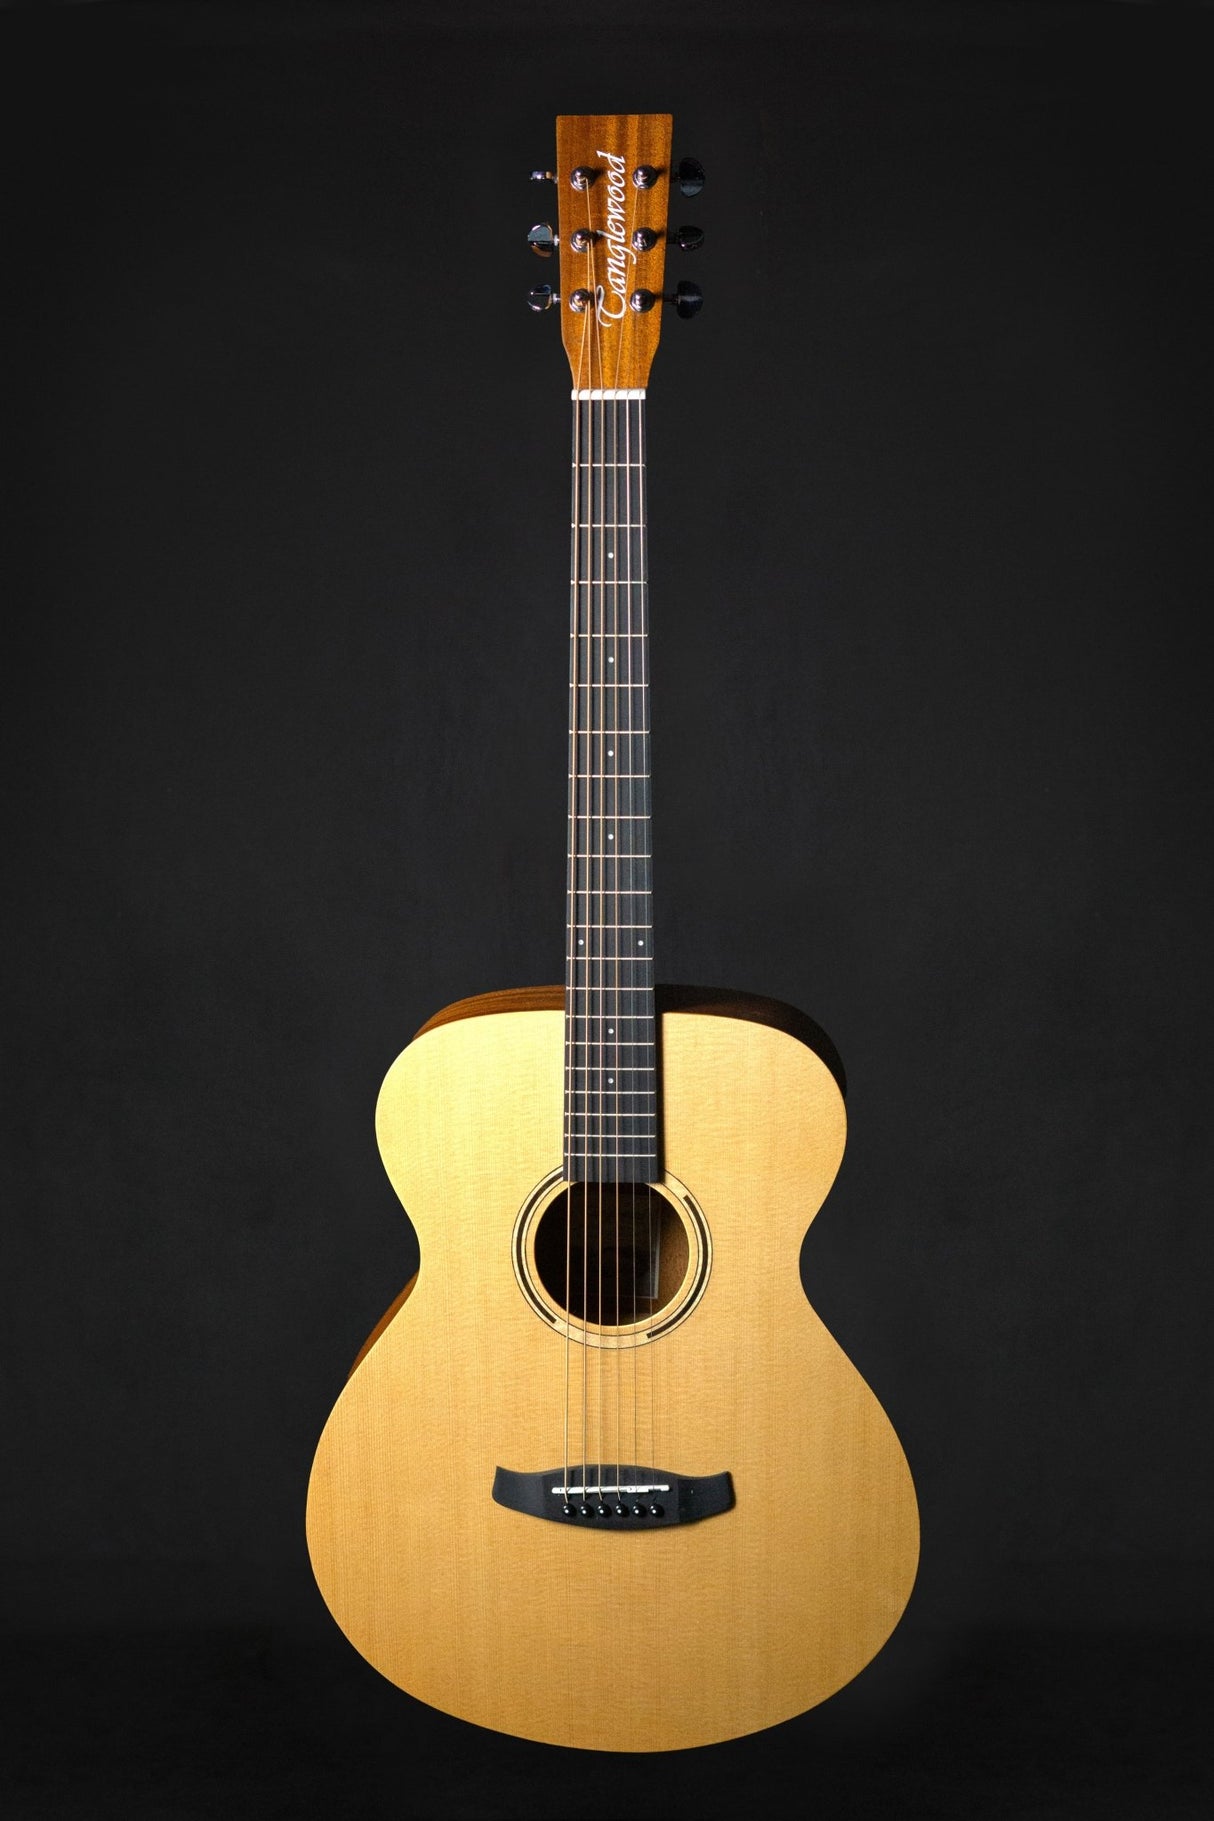 Tanglewood TWR2 OE Electro-Acoustic Guitar - Acoustic Guitars - Tanglewood